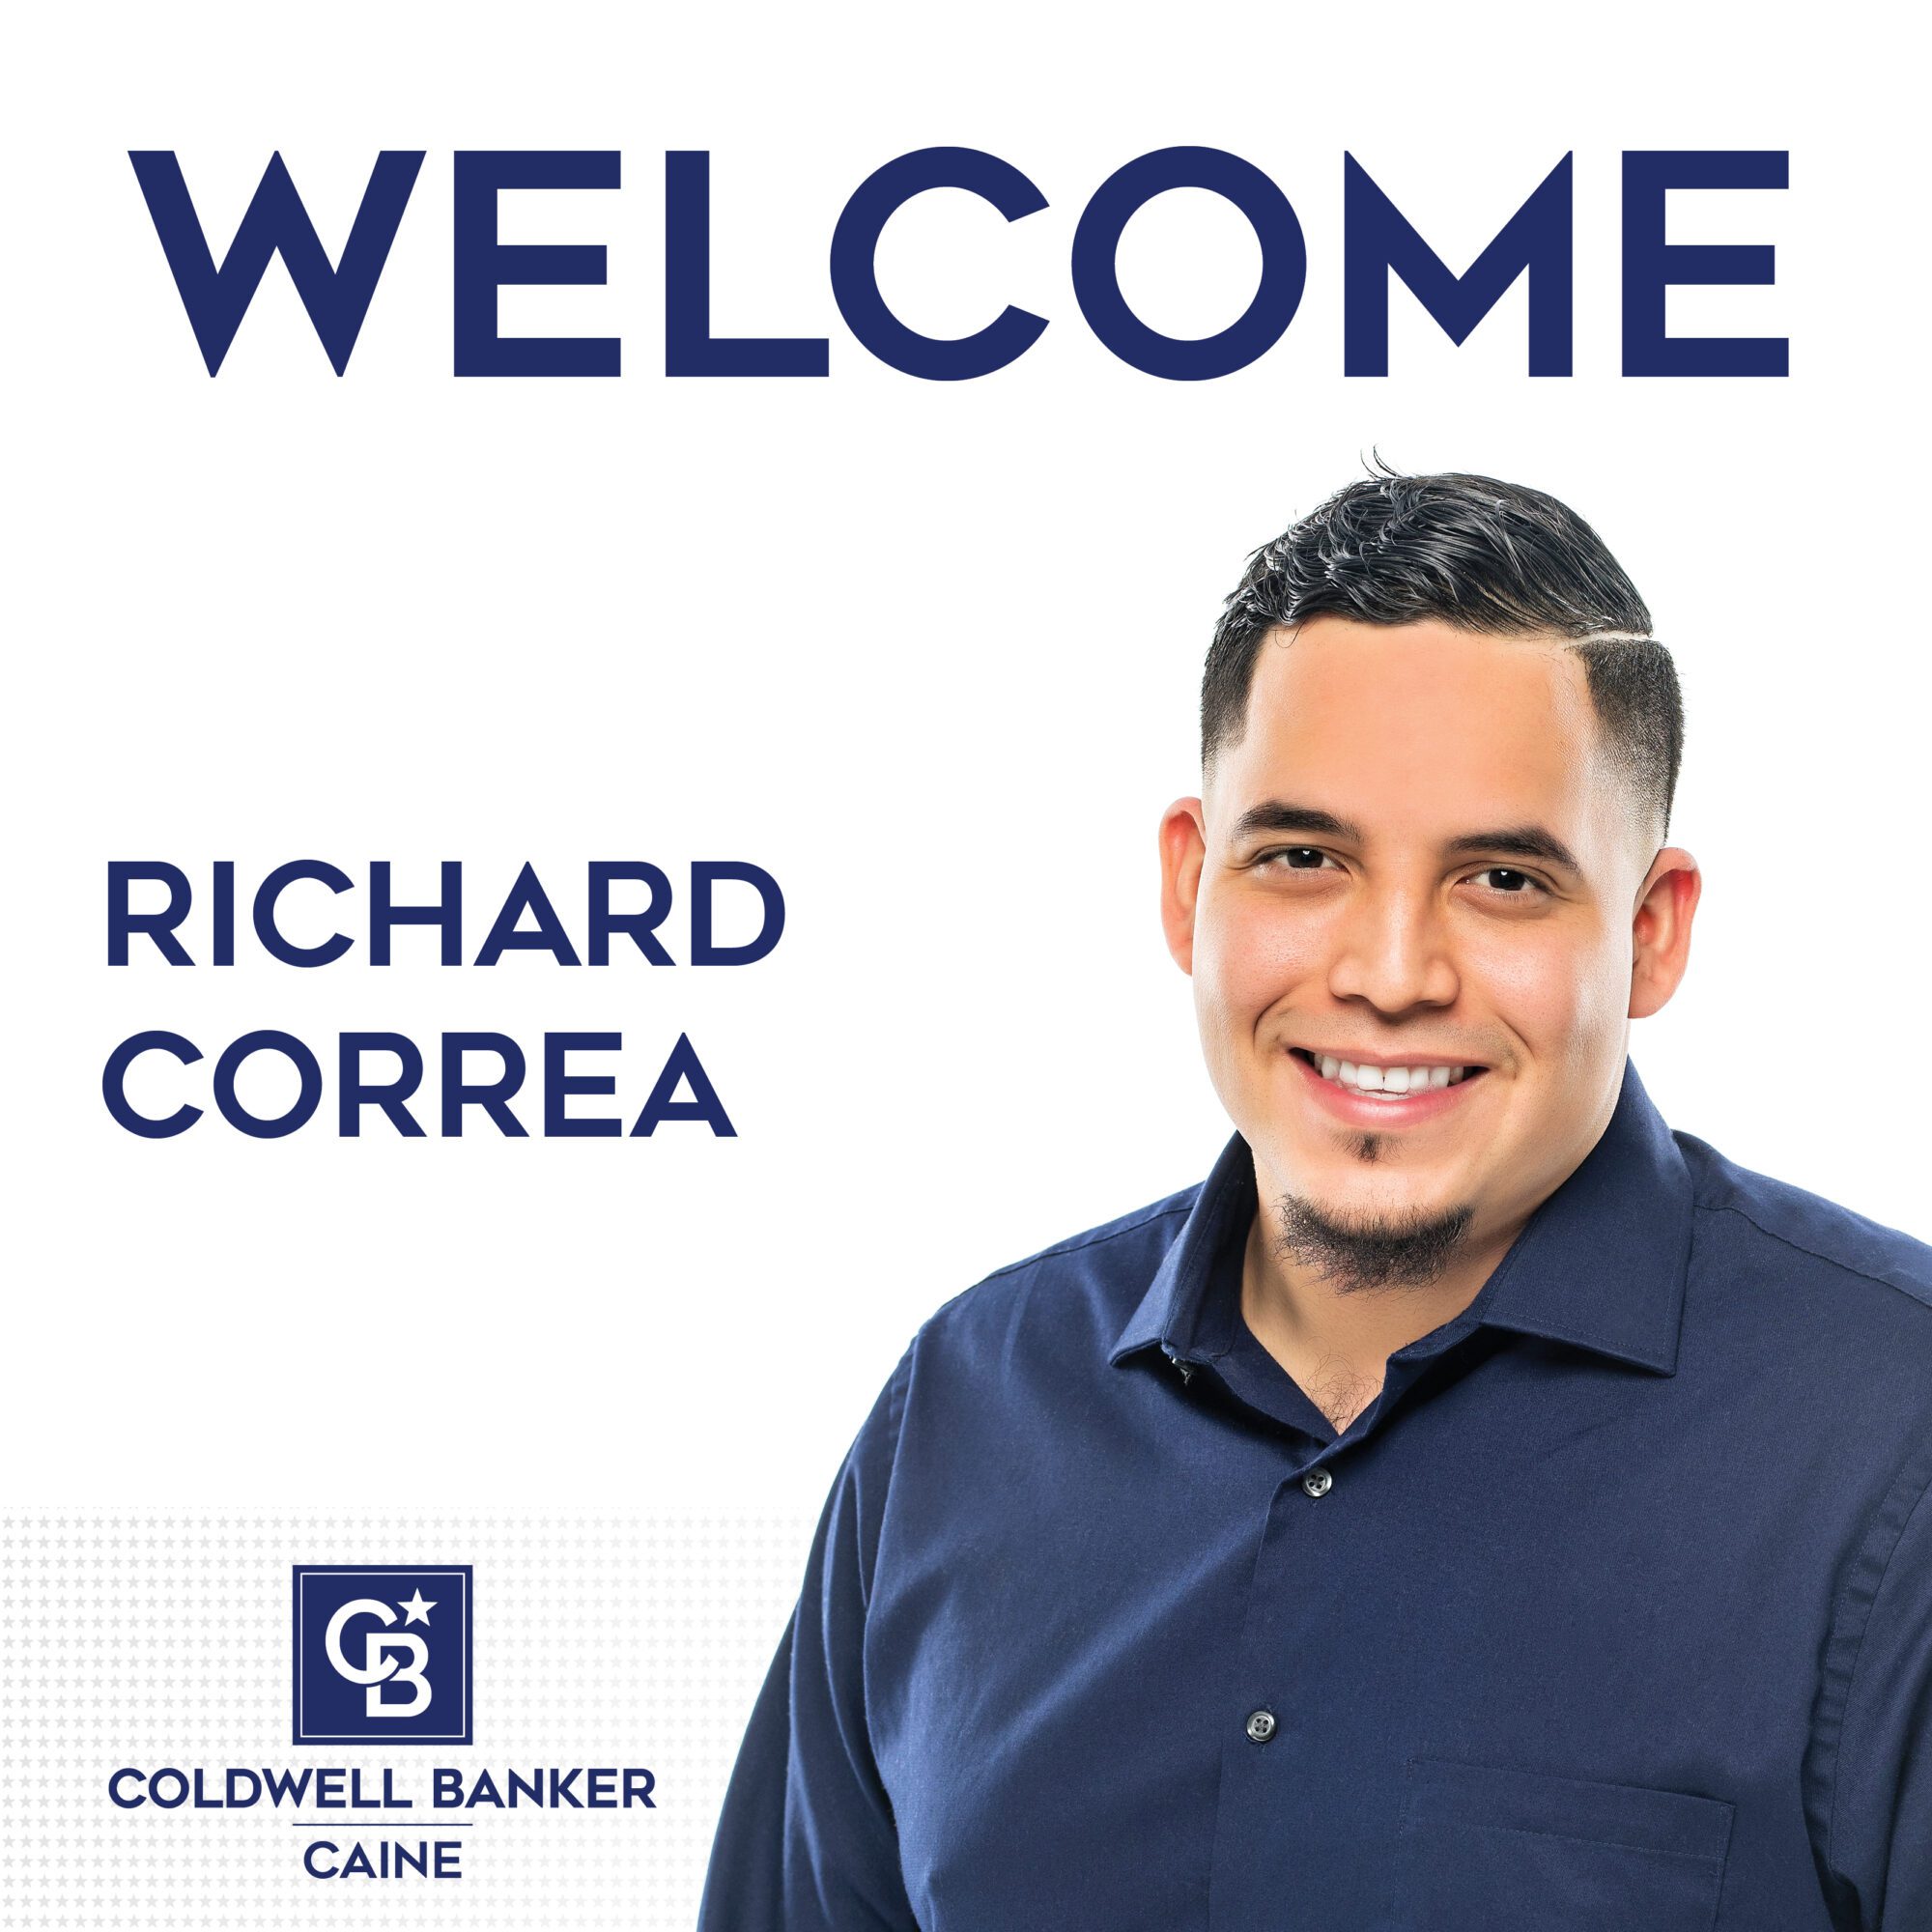 Richard Correa Joins Coldwell Banker Caine in Greenville